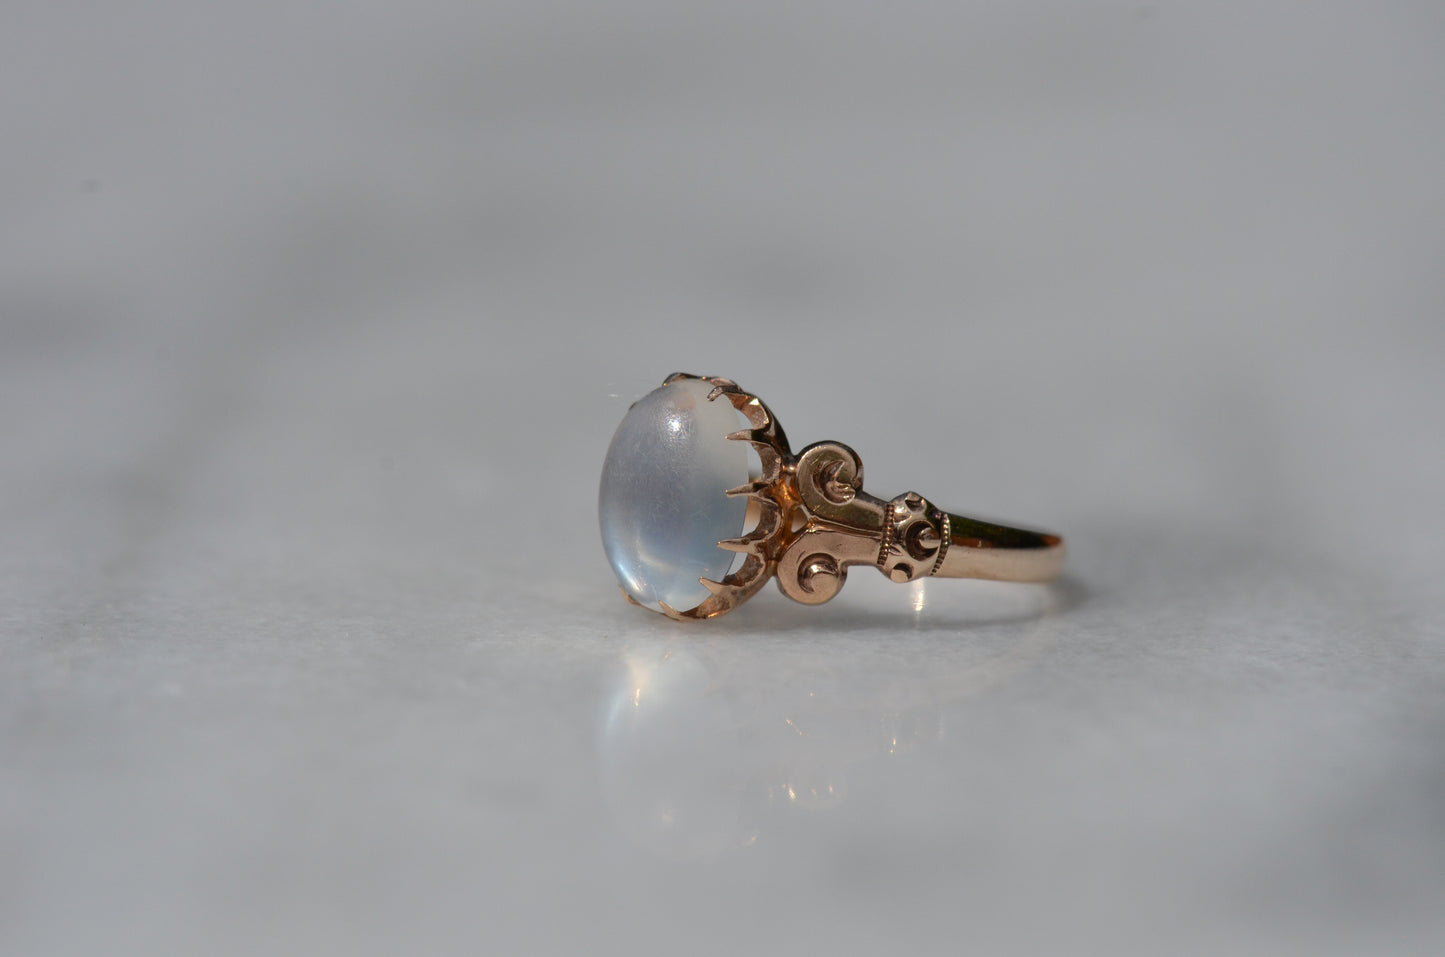 Glowing Victorian Moonstone Ring